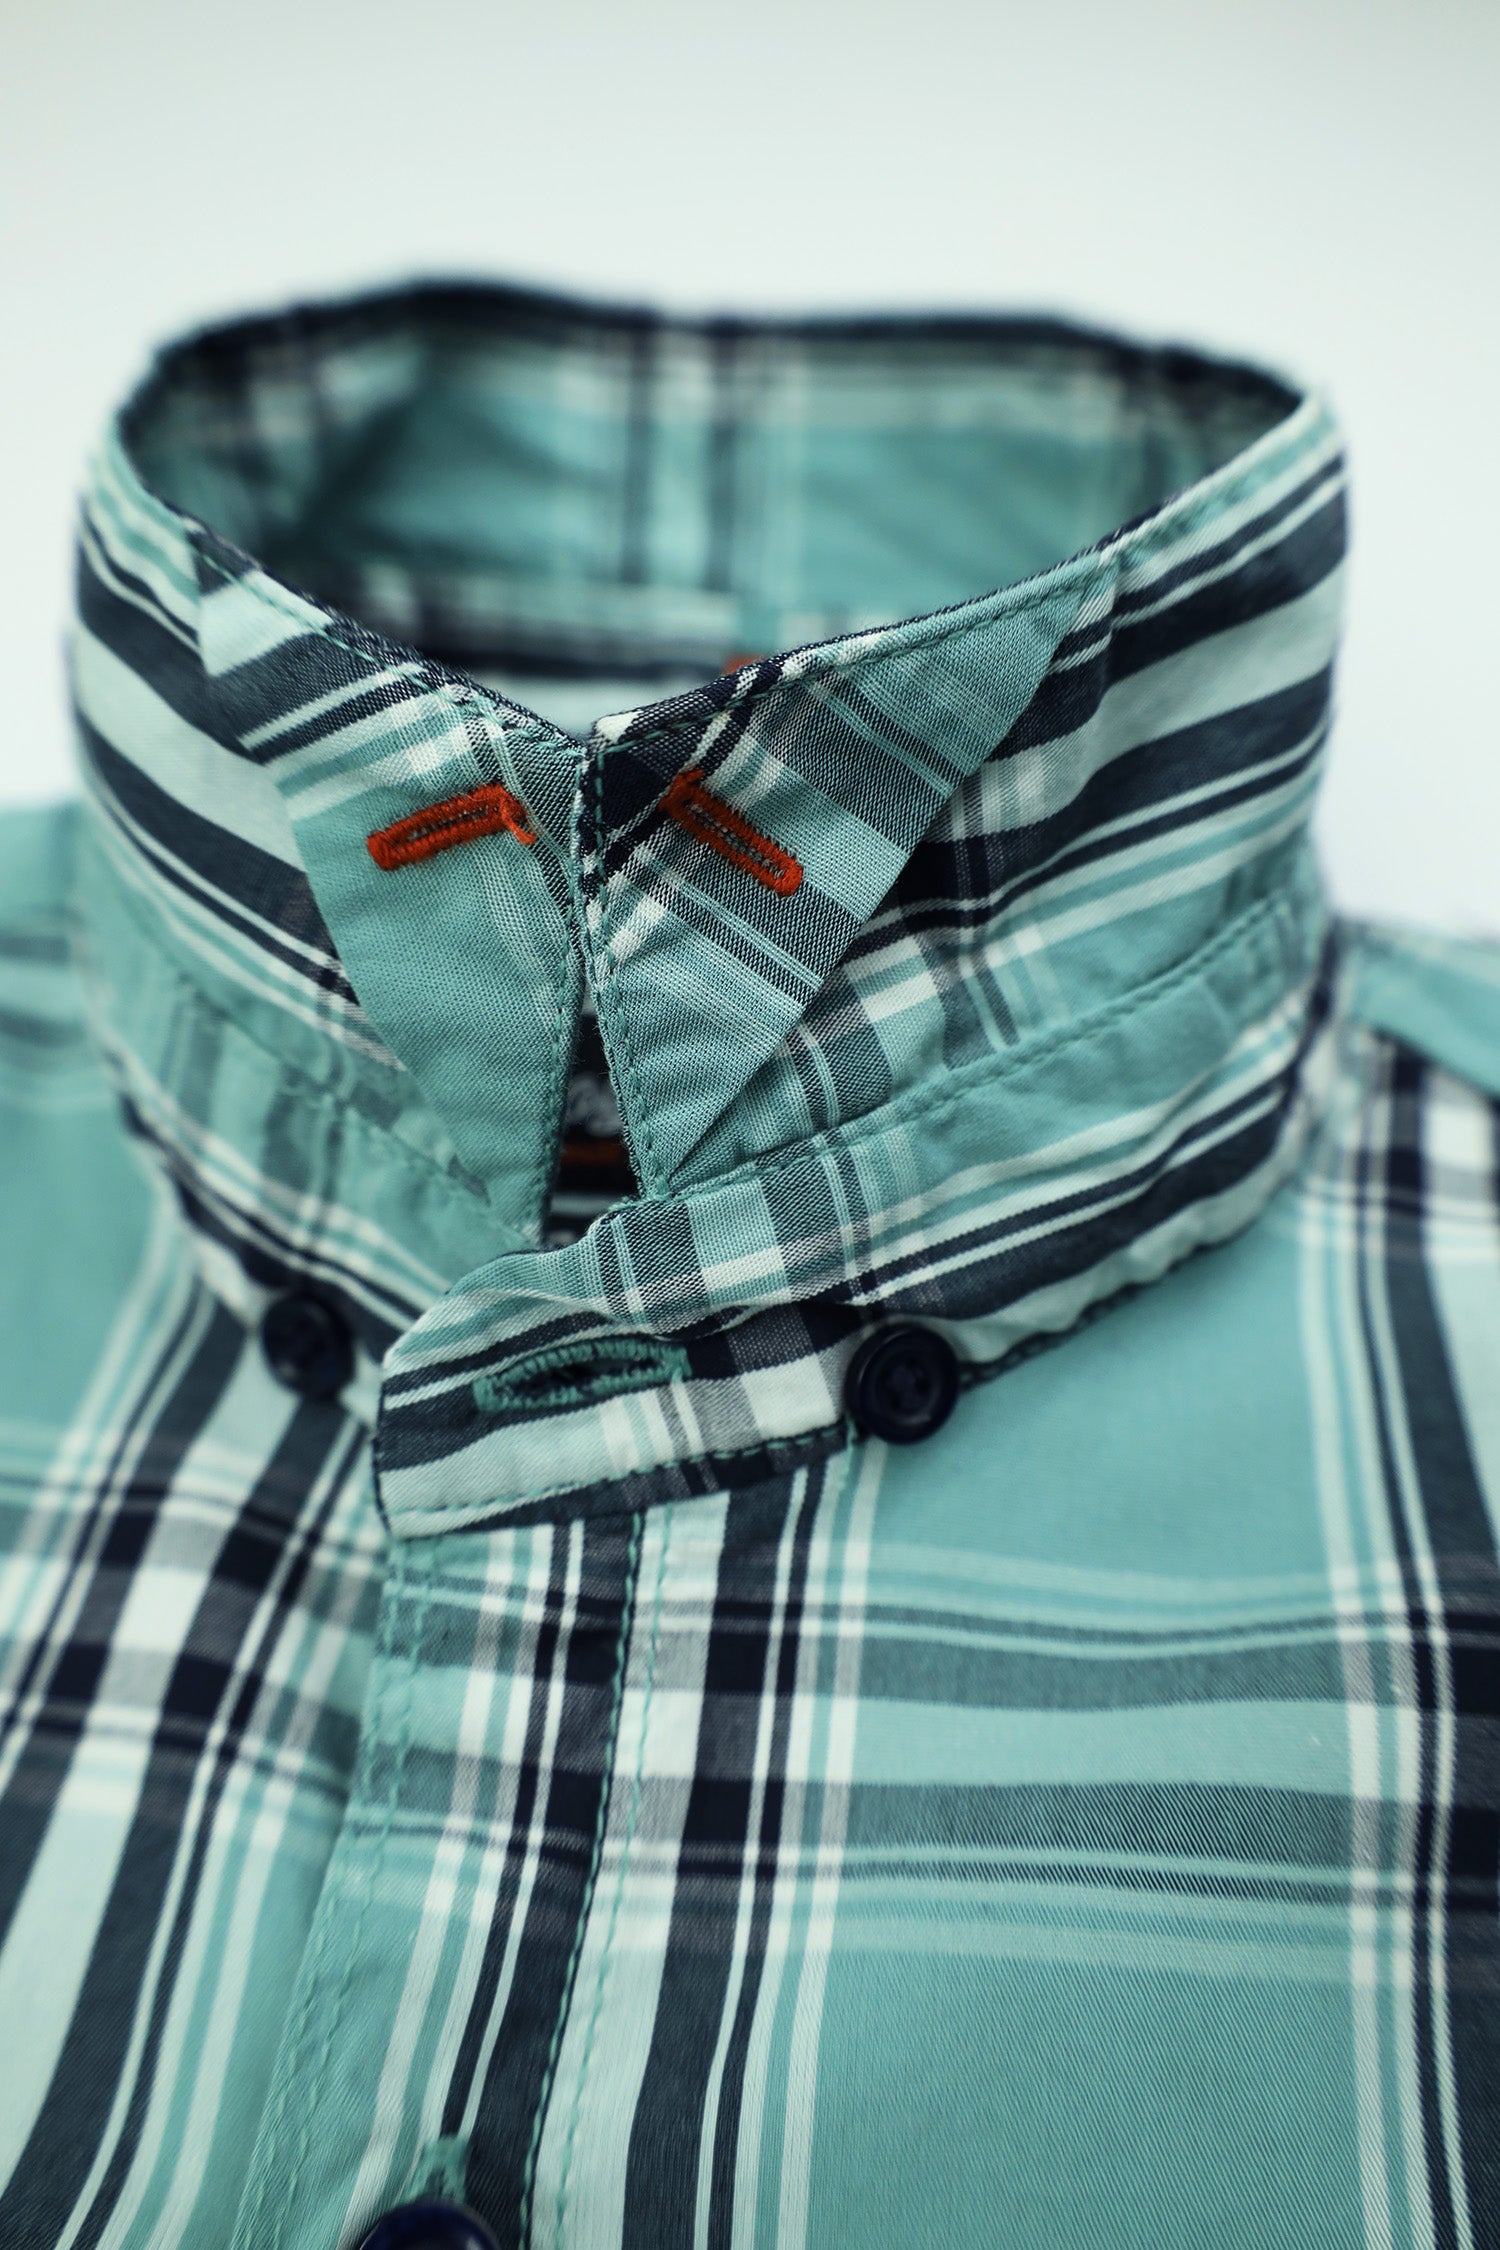 Double Lining Check Full Sleeve Casual Shirt